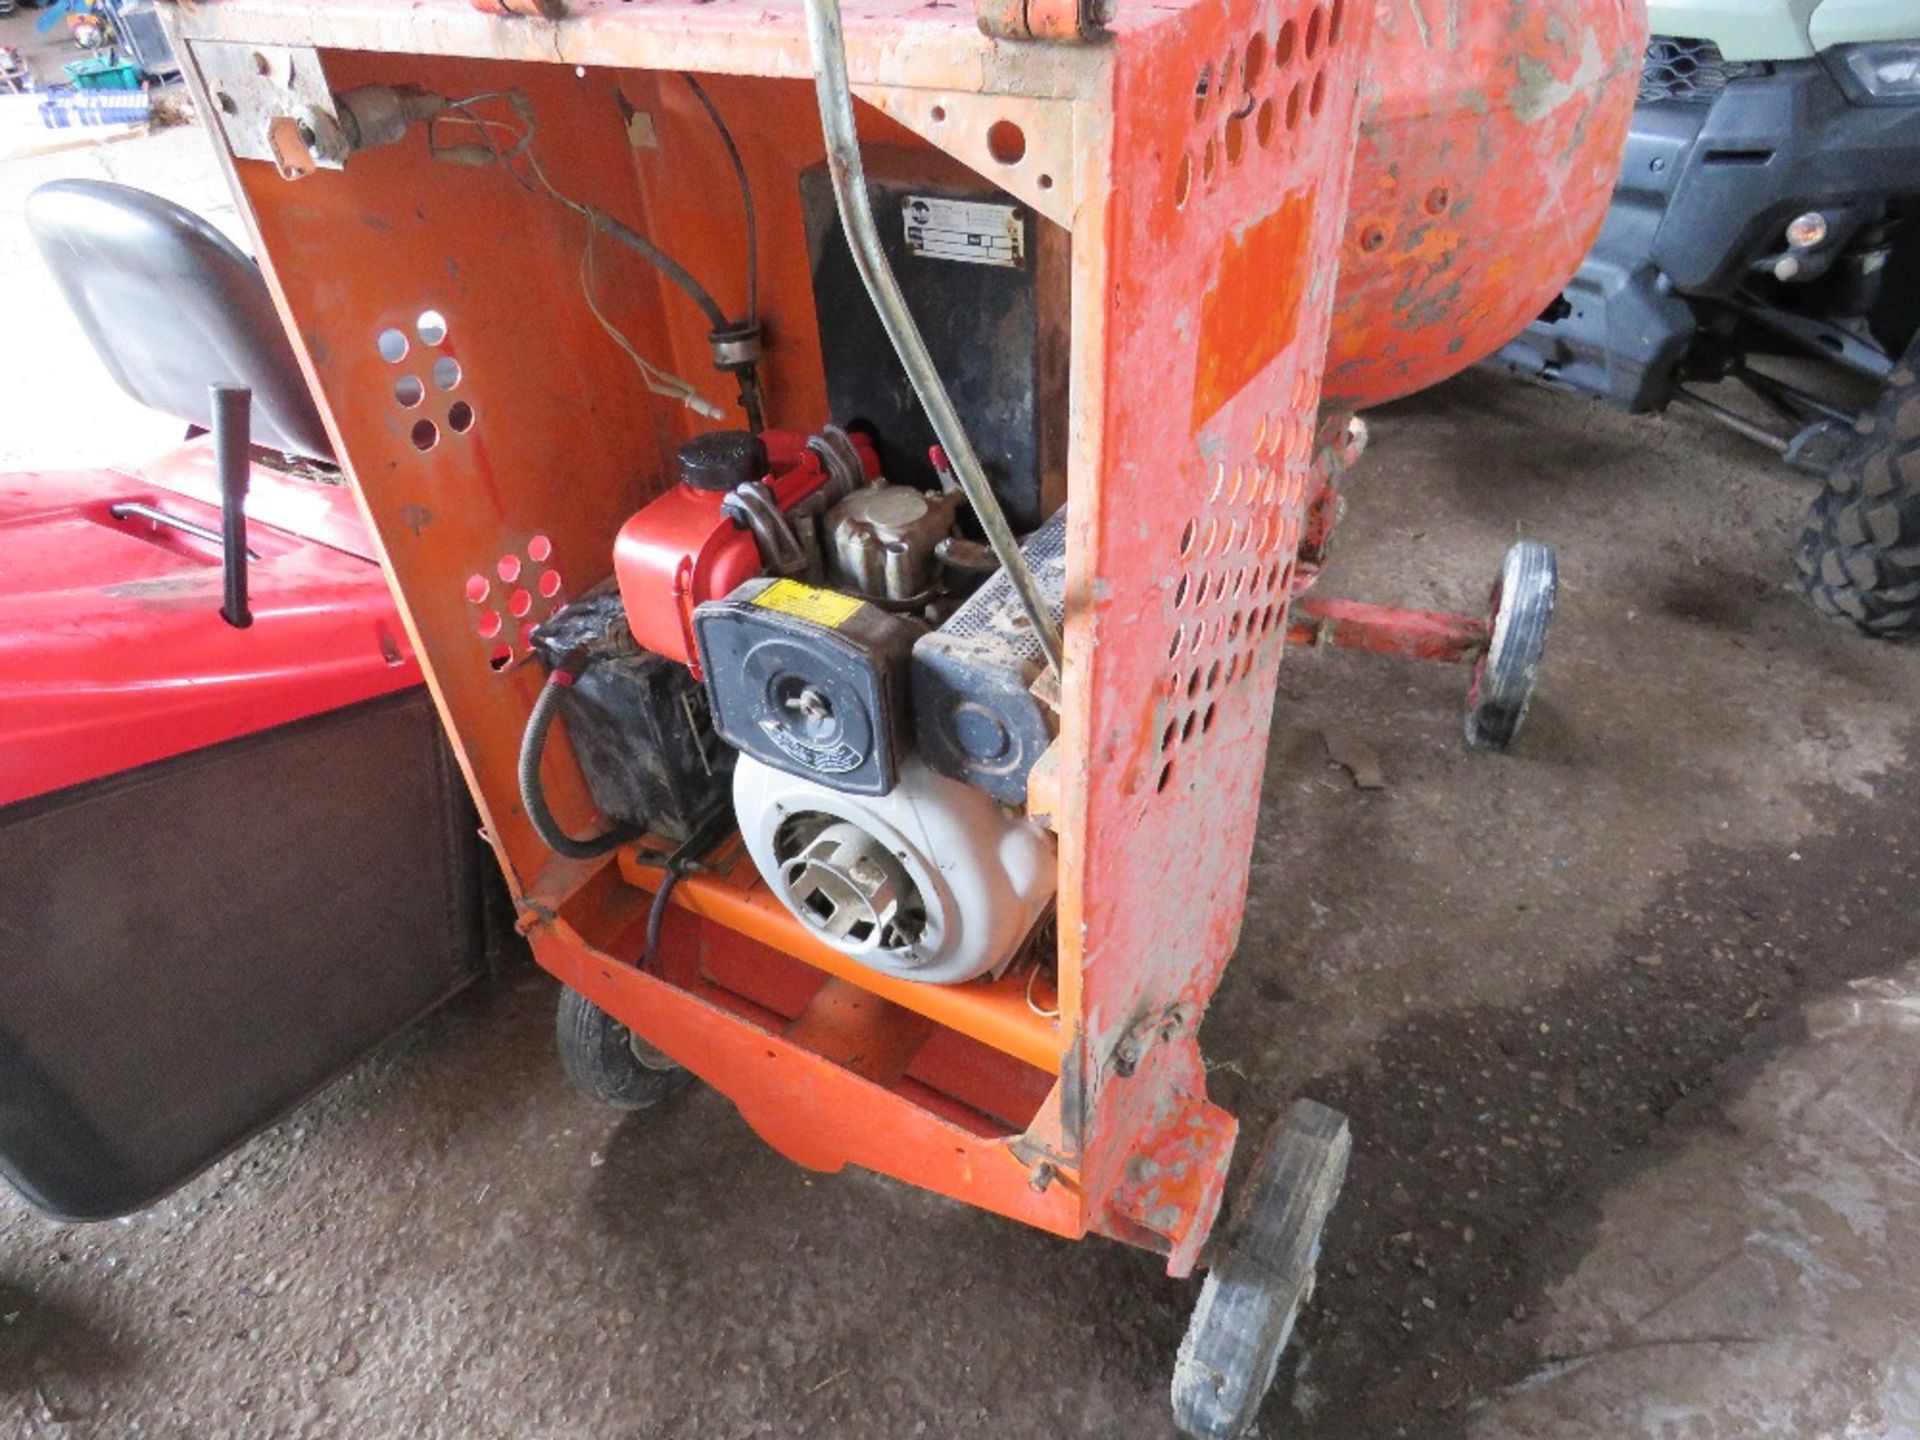 BELLE YANMAR ENGINED DIESEL SITE MIXER, WHEN TESTED WAS SEEN TO RUN AND MIX, HAS A DLAT BATTERY - Image 4 of 4